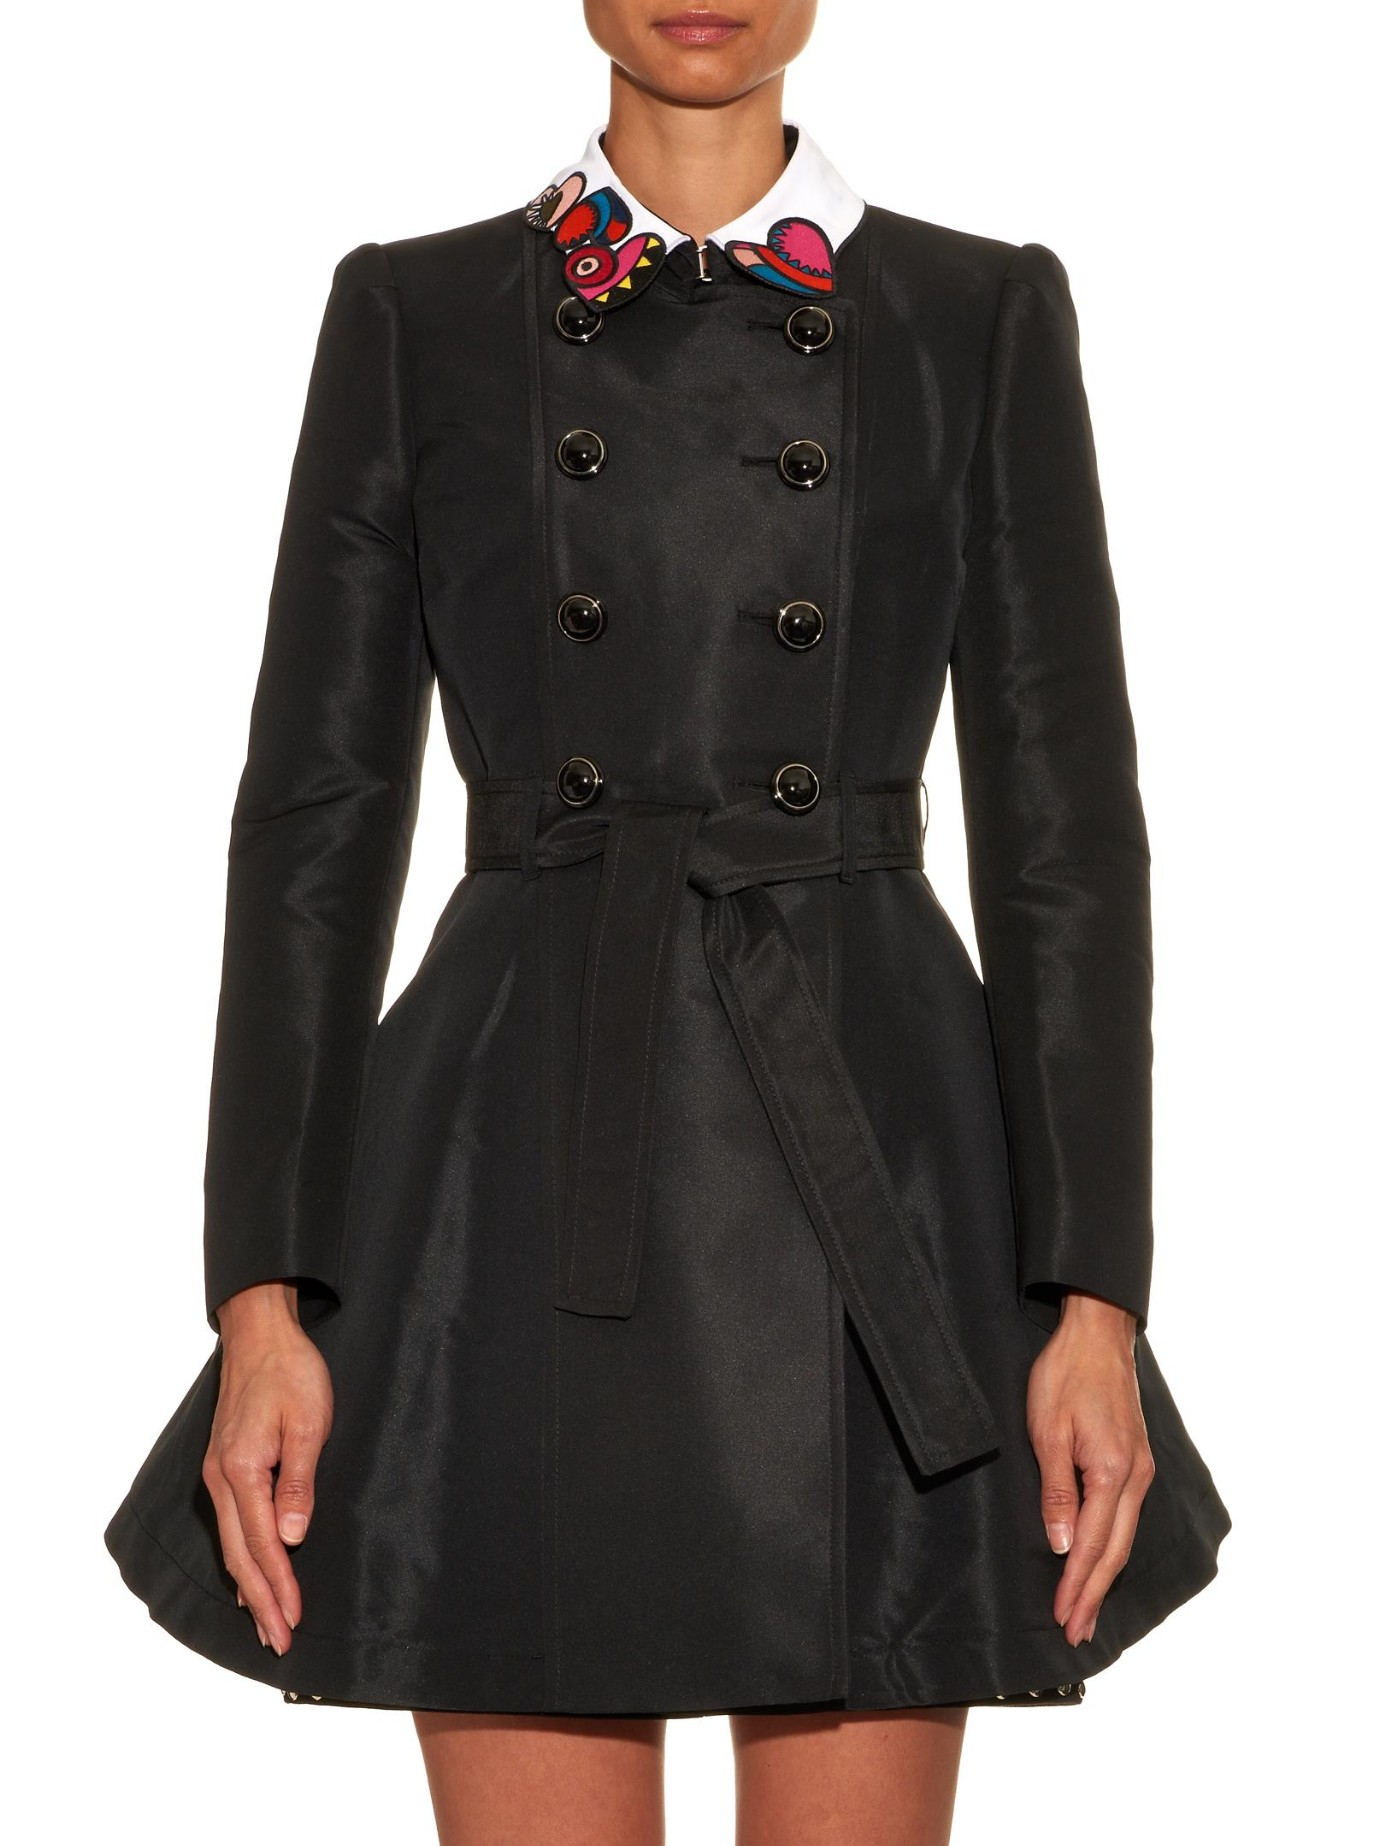 RED Valentino Embroidered Collar Trench Coat in Black - Lyst